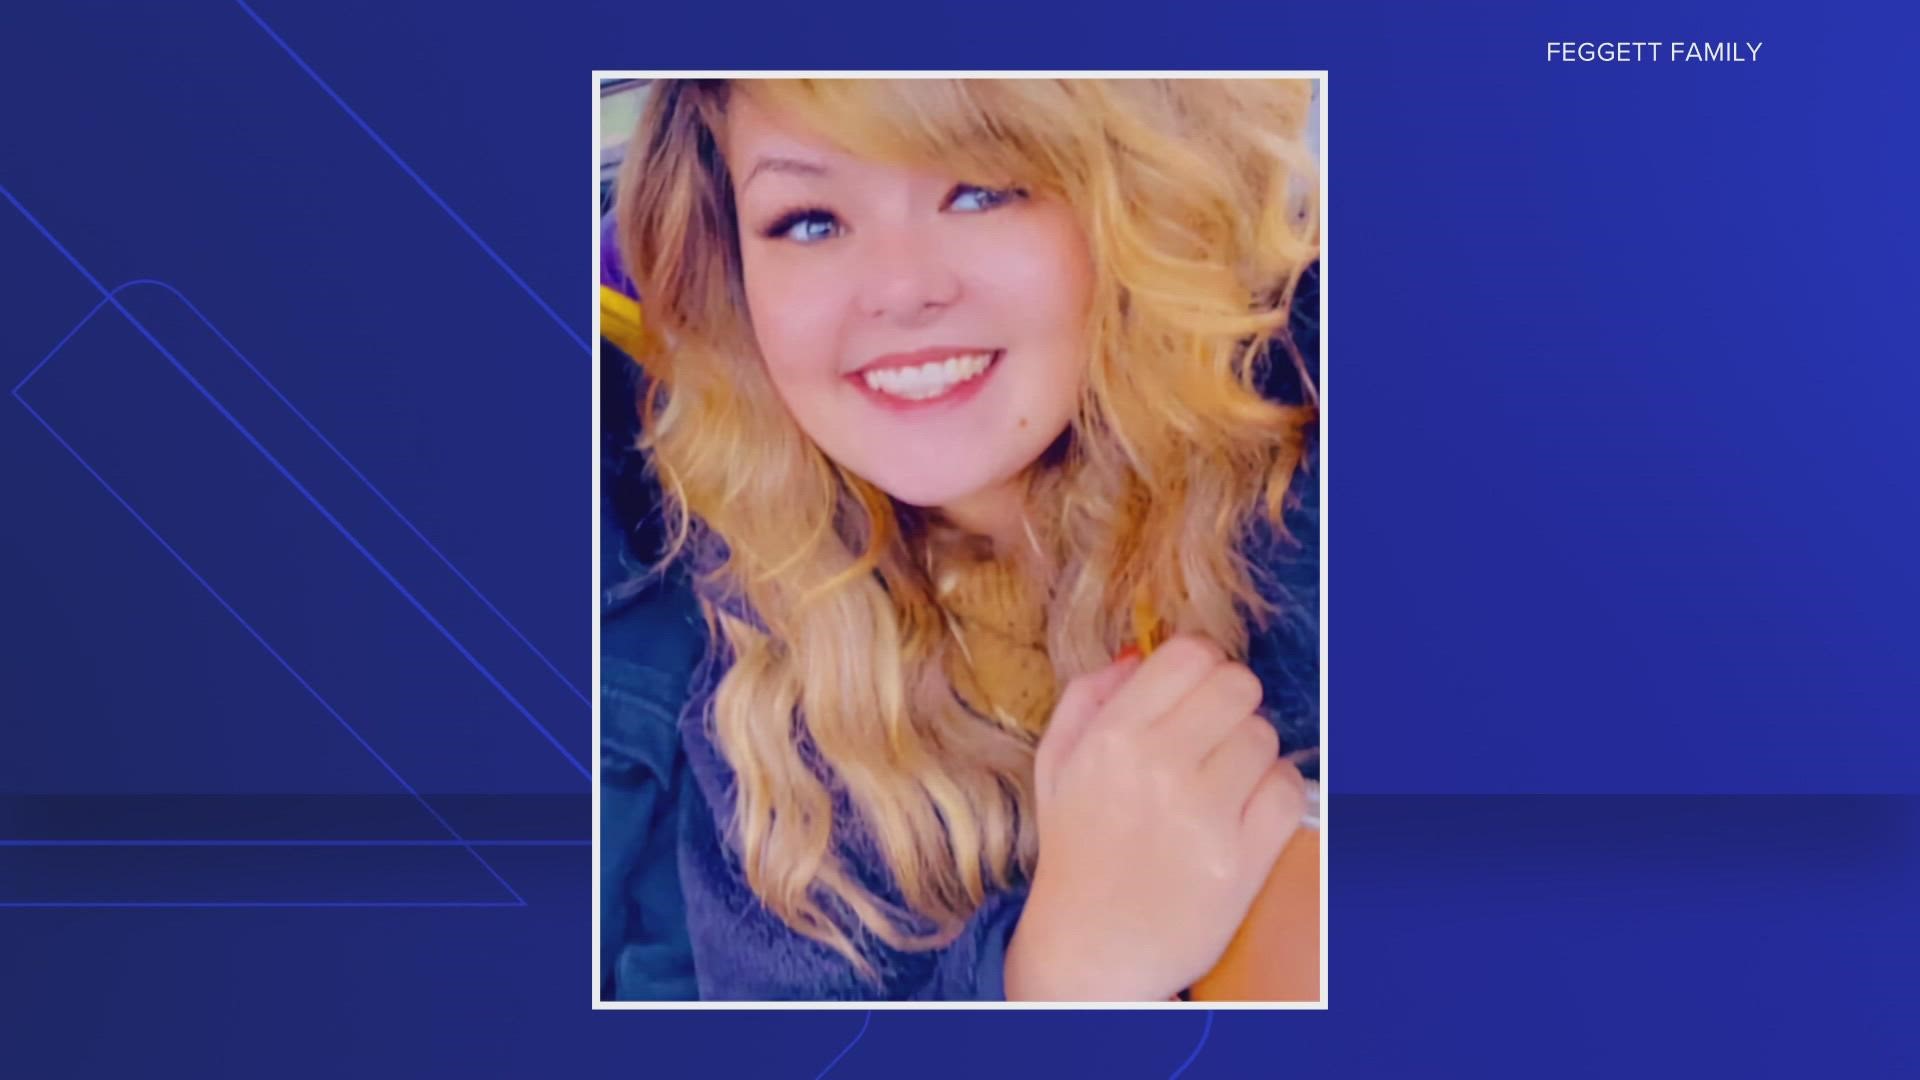 Taylor Feggett, a woman missing since Friday has been found dead after police say she crashed her car on the Gene Snyder.